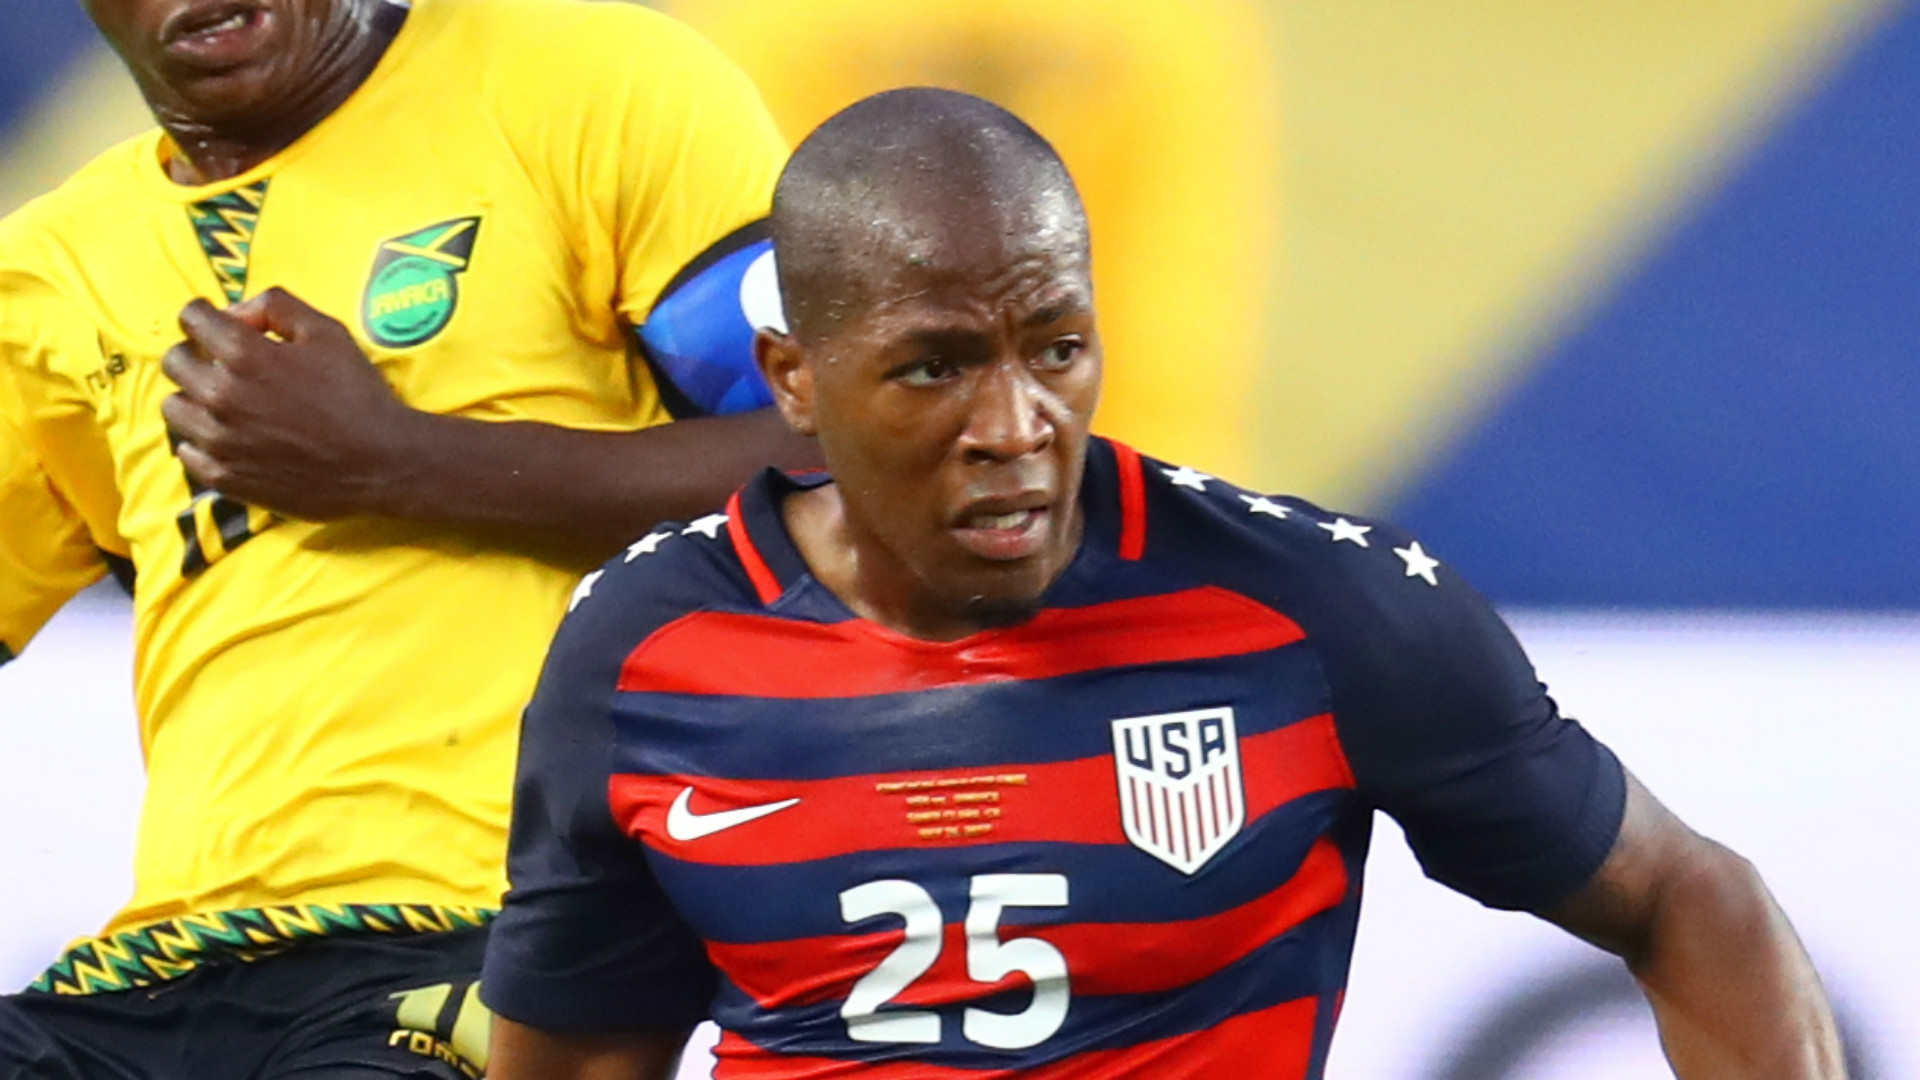 'Is the World Cup worth missing time with my family?' - Nagbe rules out USMNT return